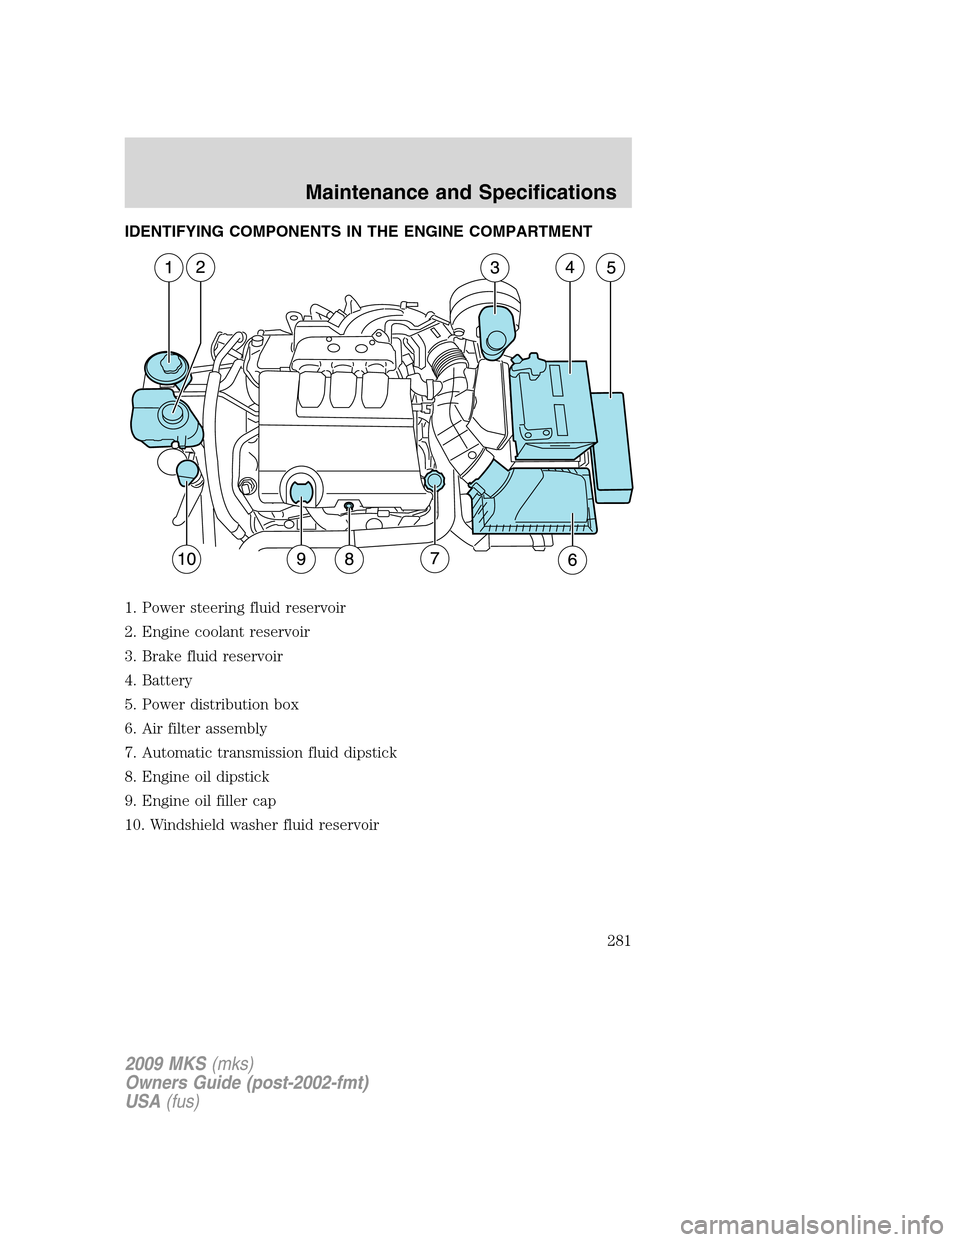 LINCOLN MKS 2009  Owners Manual IDENTIFYING COMPONENTS IN THE ENGINE COMPARTMENT
1. Power steering fluid reservoir
2. Engine coolant reservoir
3. Brake fluid reservoir
4. Battery
5. Power distribution box
6. Air filter assembly
7. A